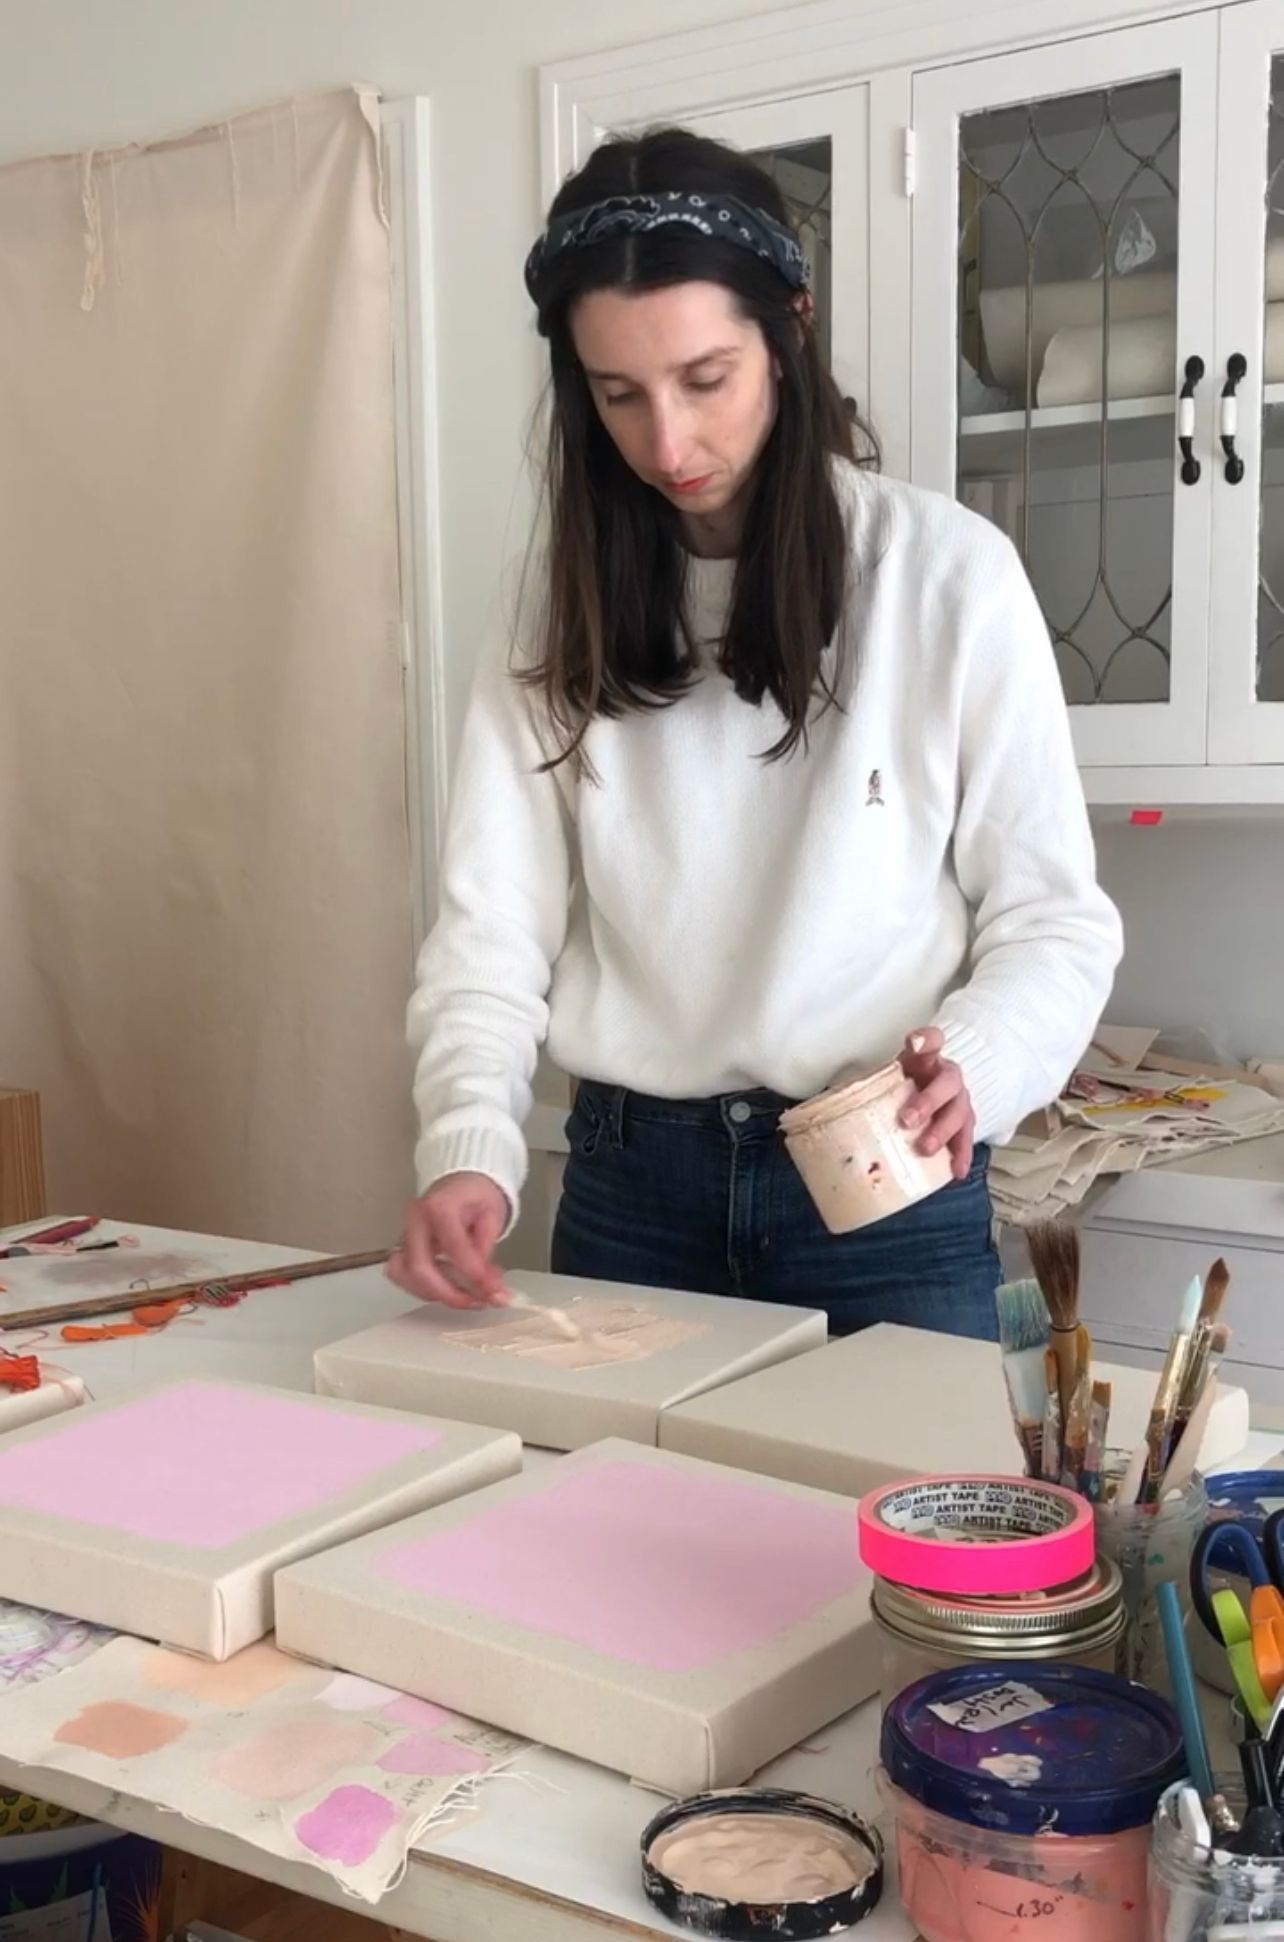 Emily Keating Snyder in her studio painting one of four small canvases in front of her a light shade of pink